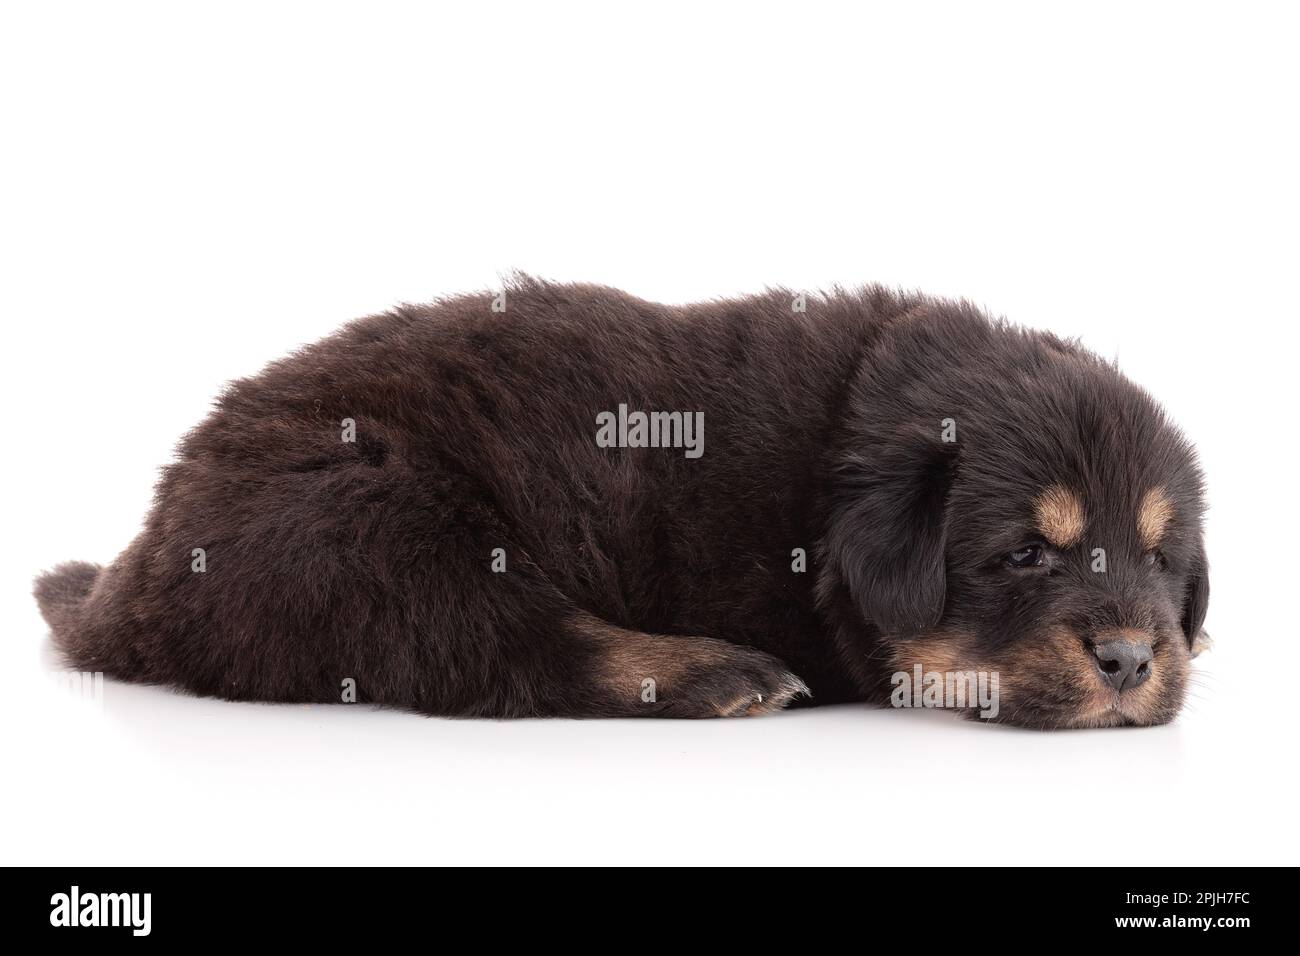 Puppy from a Tibetan dog farm sleeping peacefully on a white background Stock Photo